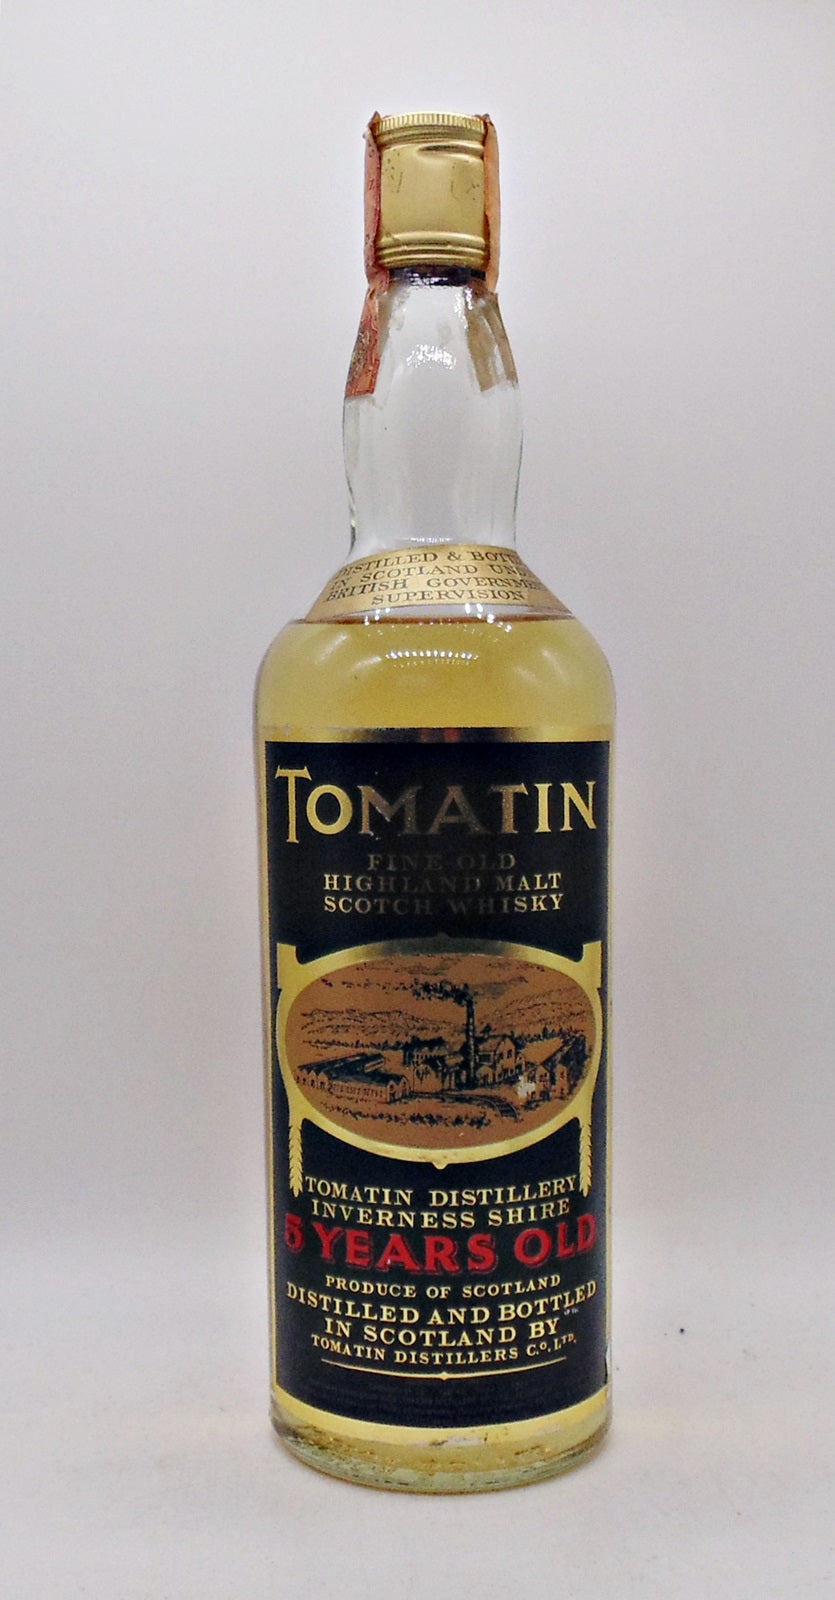 Tomatin 5 Year Old 1980s Bottling